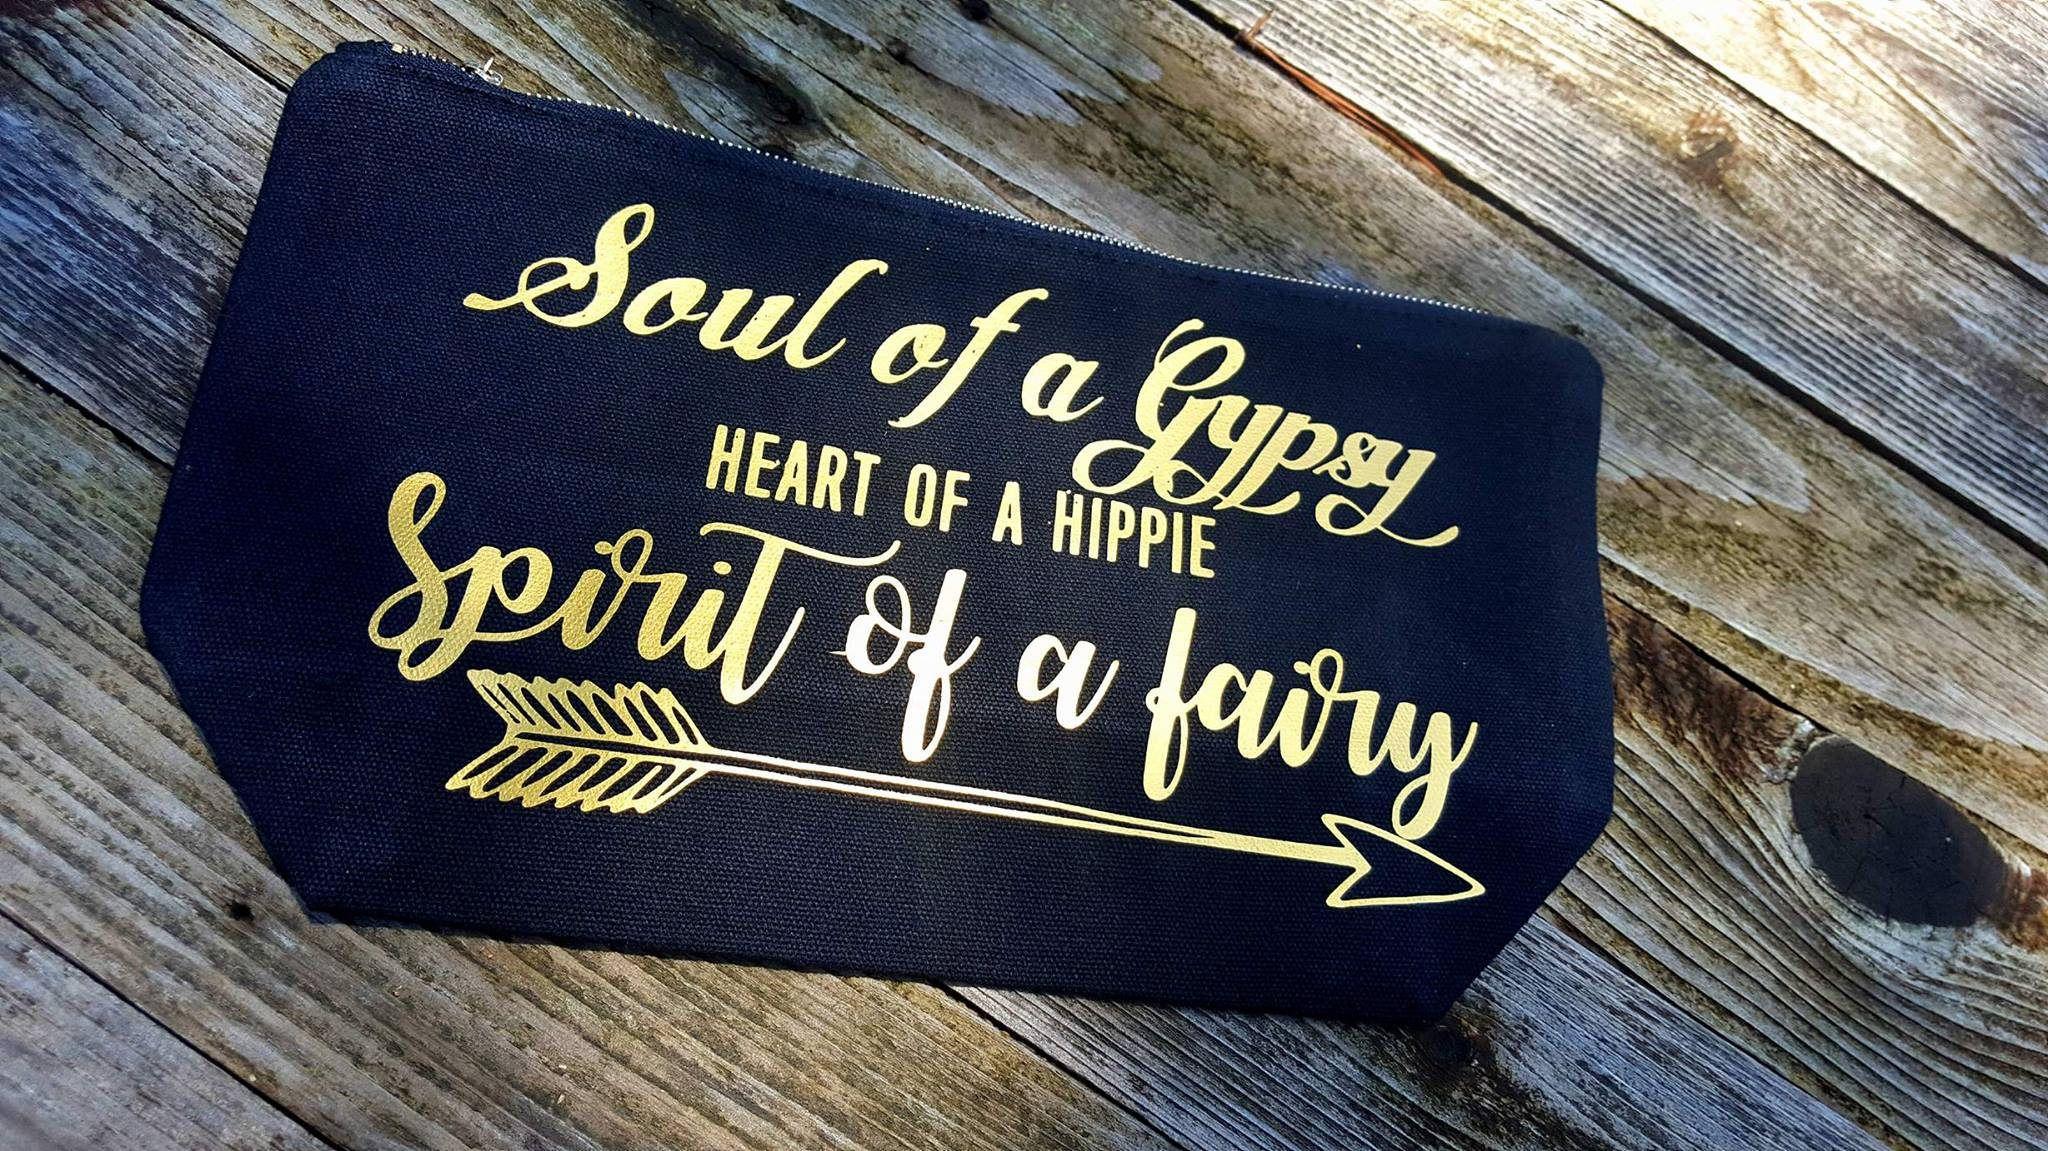 Hippie Spirit Logo - Soul of a gypsy heart of a hippie spirit of a fairy Large Makeup Bag ...